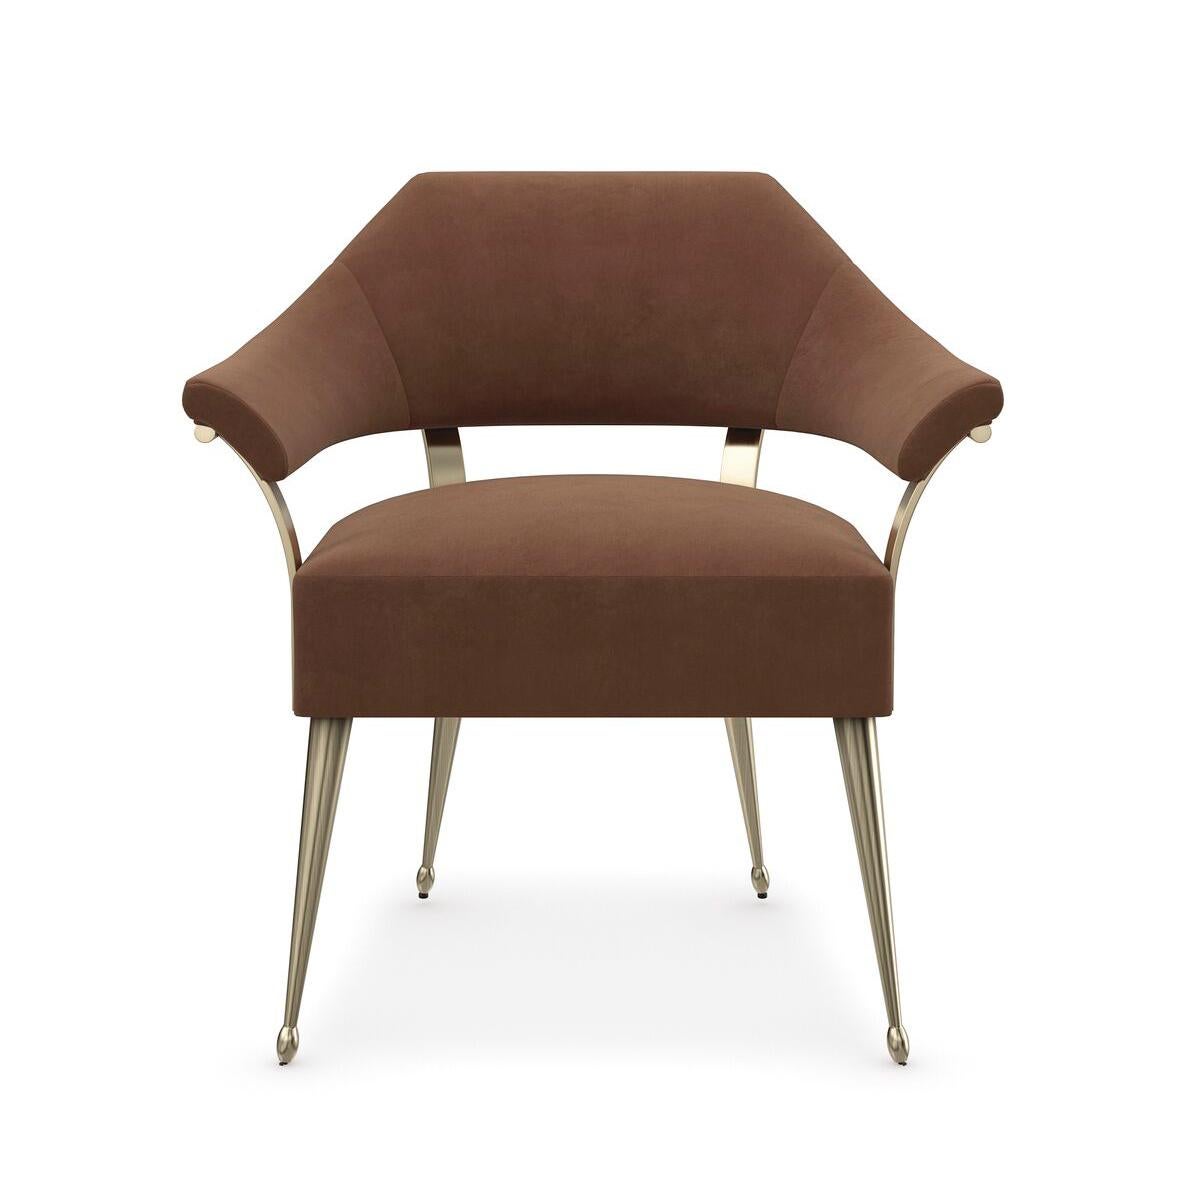 With an elegant silhouette inspired by a French antique. The chair adds classic warmth and a note of luxe with its slender frame in Champagne Gold and rust-colored mohair fabric with an exposed burl accent cinching the outside back.

Dimensions: